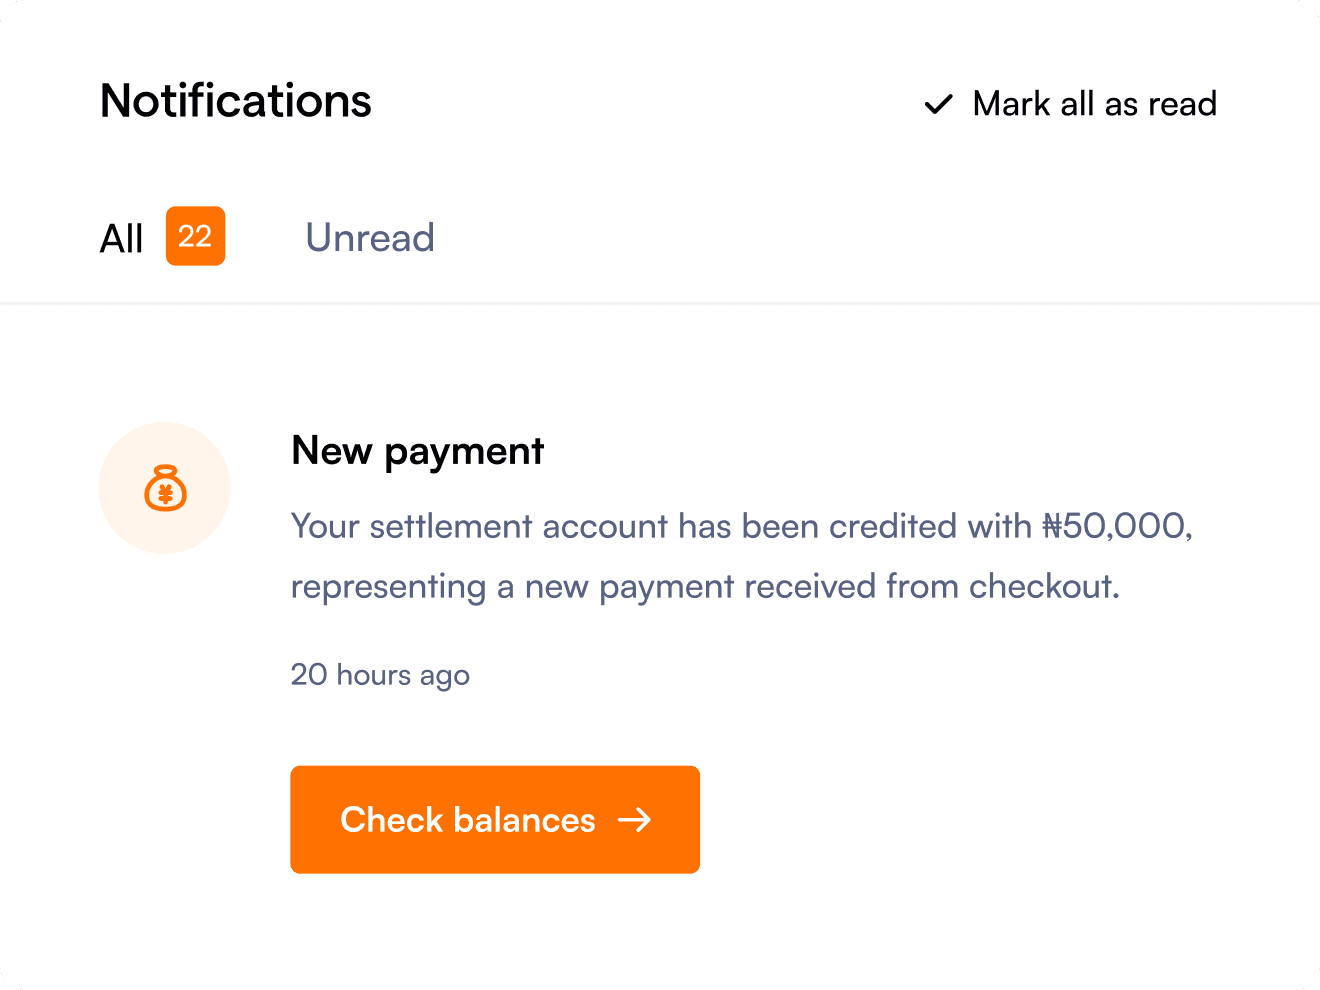 An image showing notification of a new payment that has occurred on a payment link